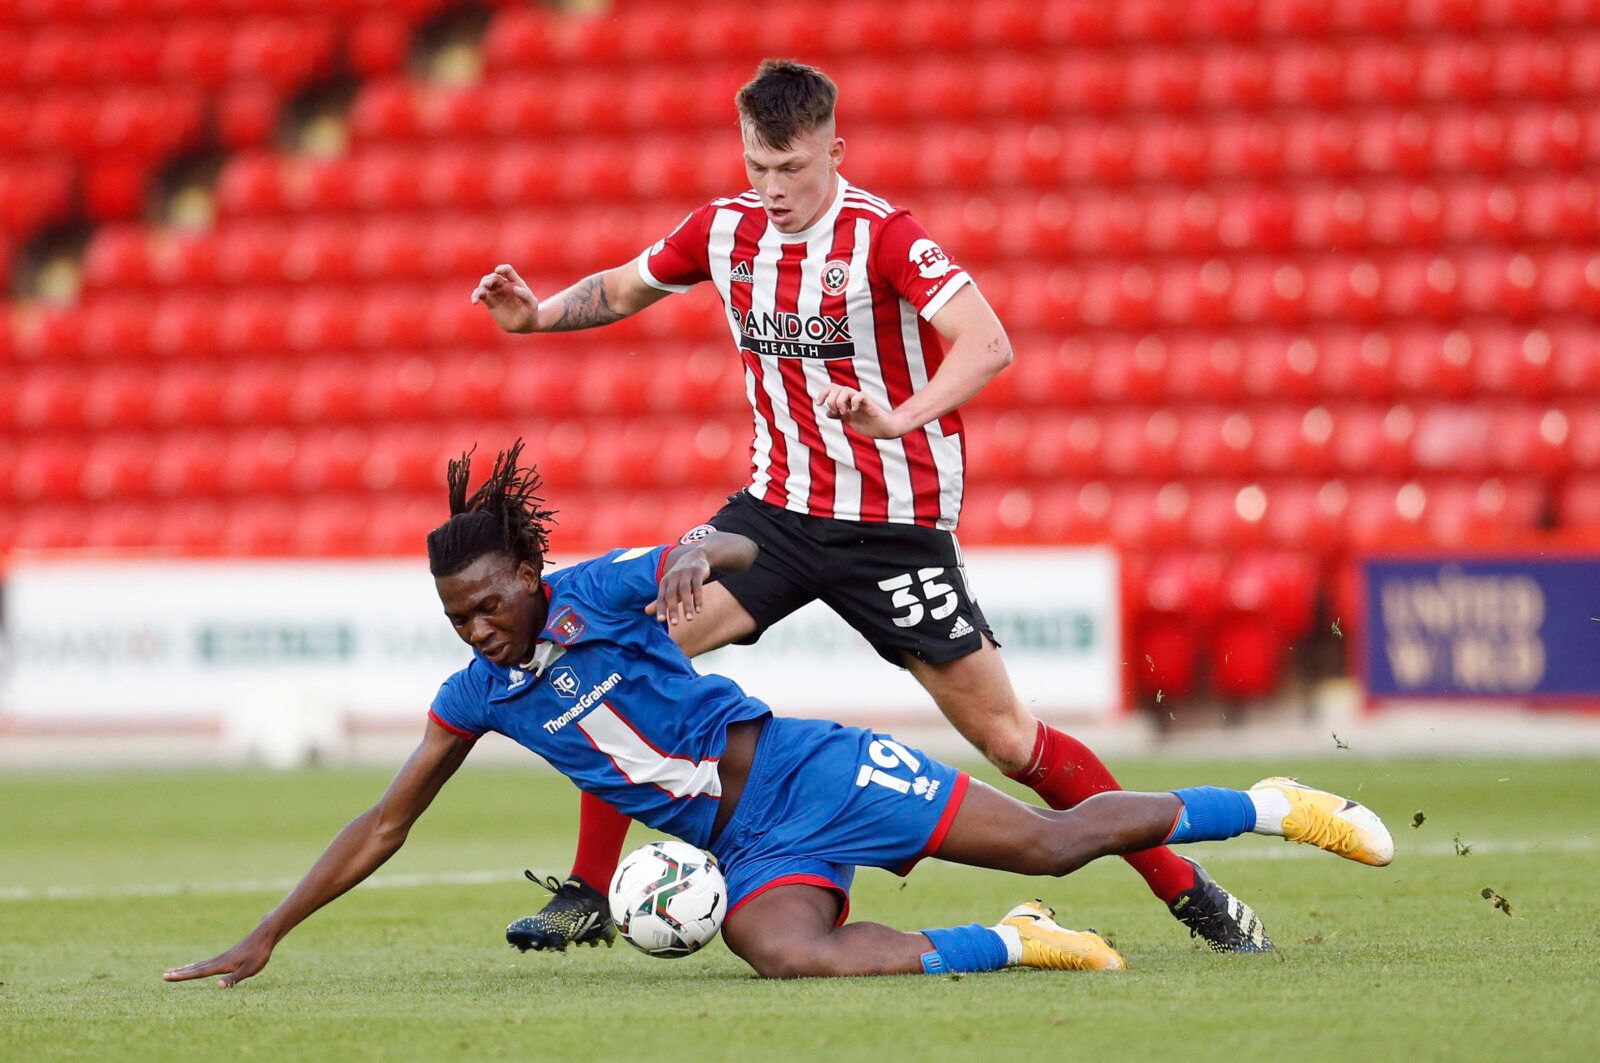 Soccer Football - Carabao Cup - First Round - Sheffield United v Carlisle United - Bramall Lane, Sheffield, Britain - August 10, 2021 Carlisle United's Manasse Mampala and Sheffield United's Kacper Lopata in action Action Images/Ed Sykes EDITORIAL USE ONLY. No use with unauthorized audio, video, data, fixture lists, club/league logos or 'live' services. Online in-match use limited to 75 images, no video emulation. No use in betting, games or single club /league/player publications.  Please conta